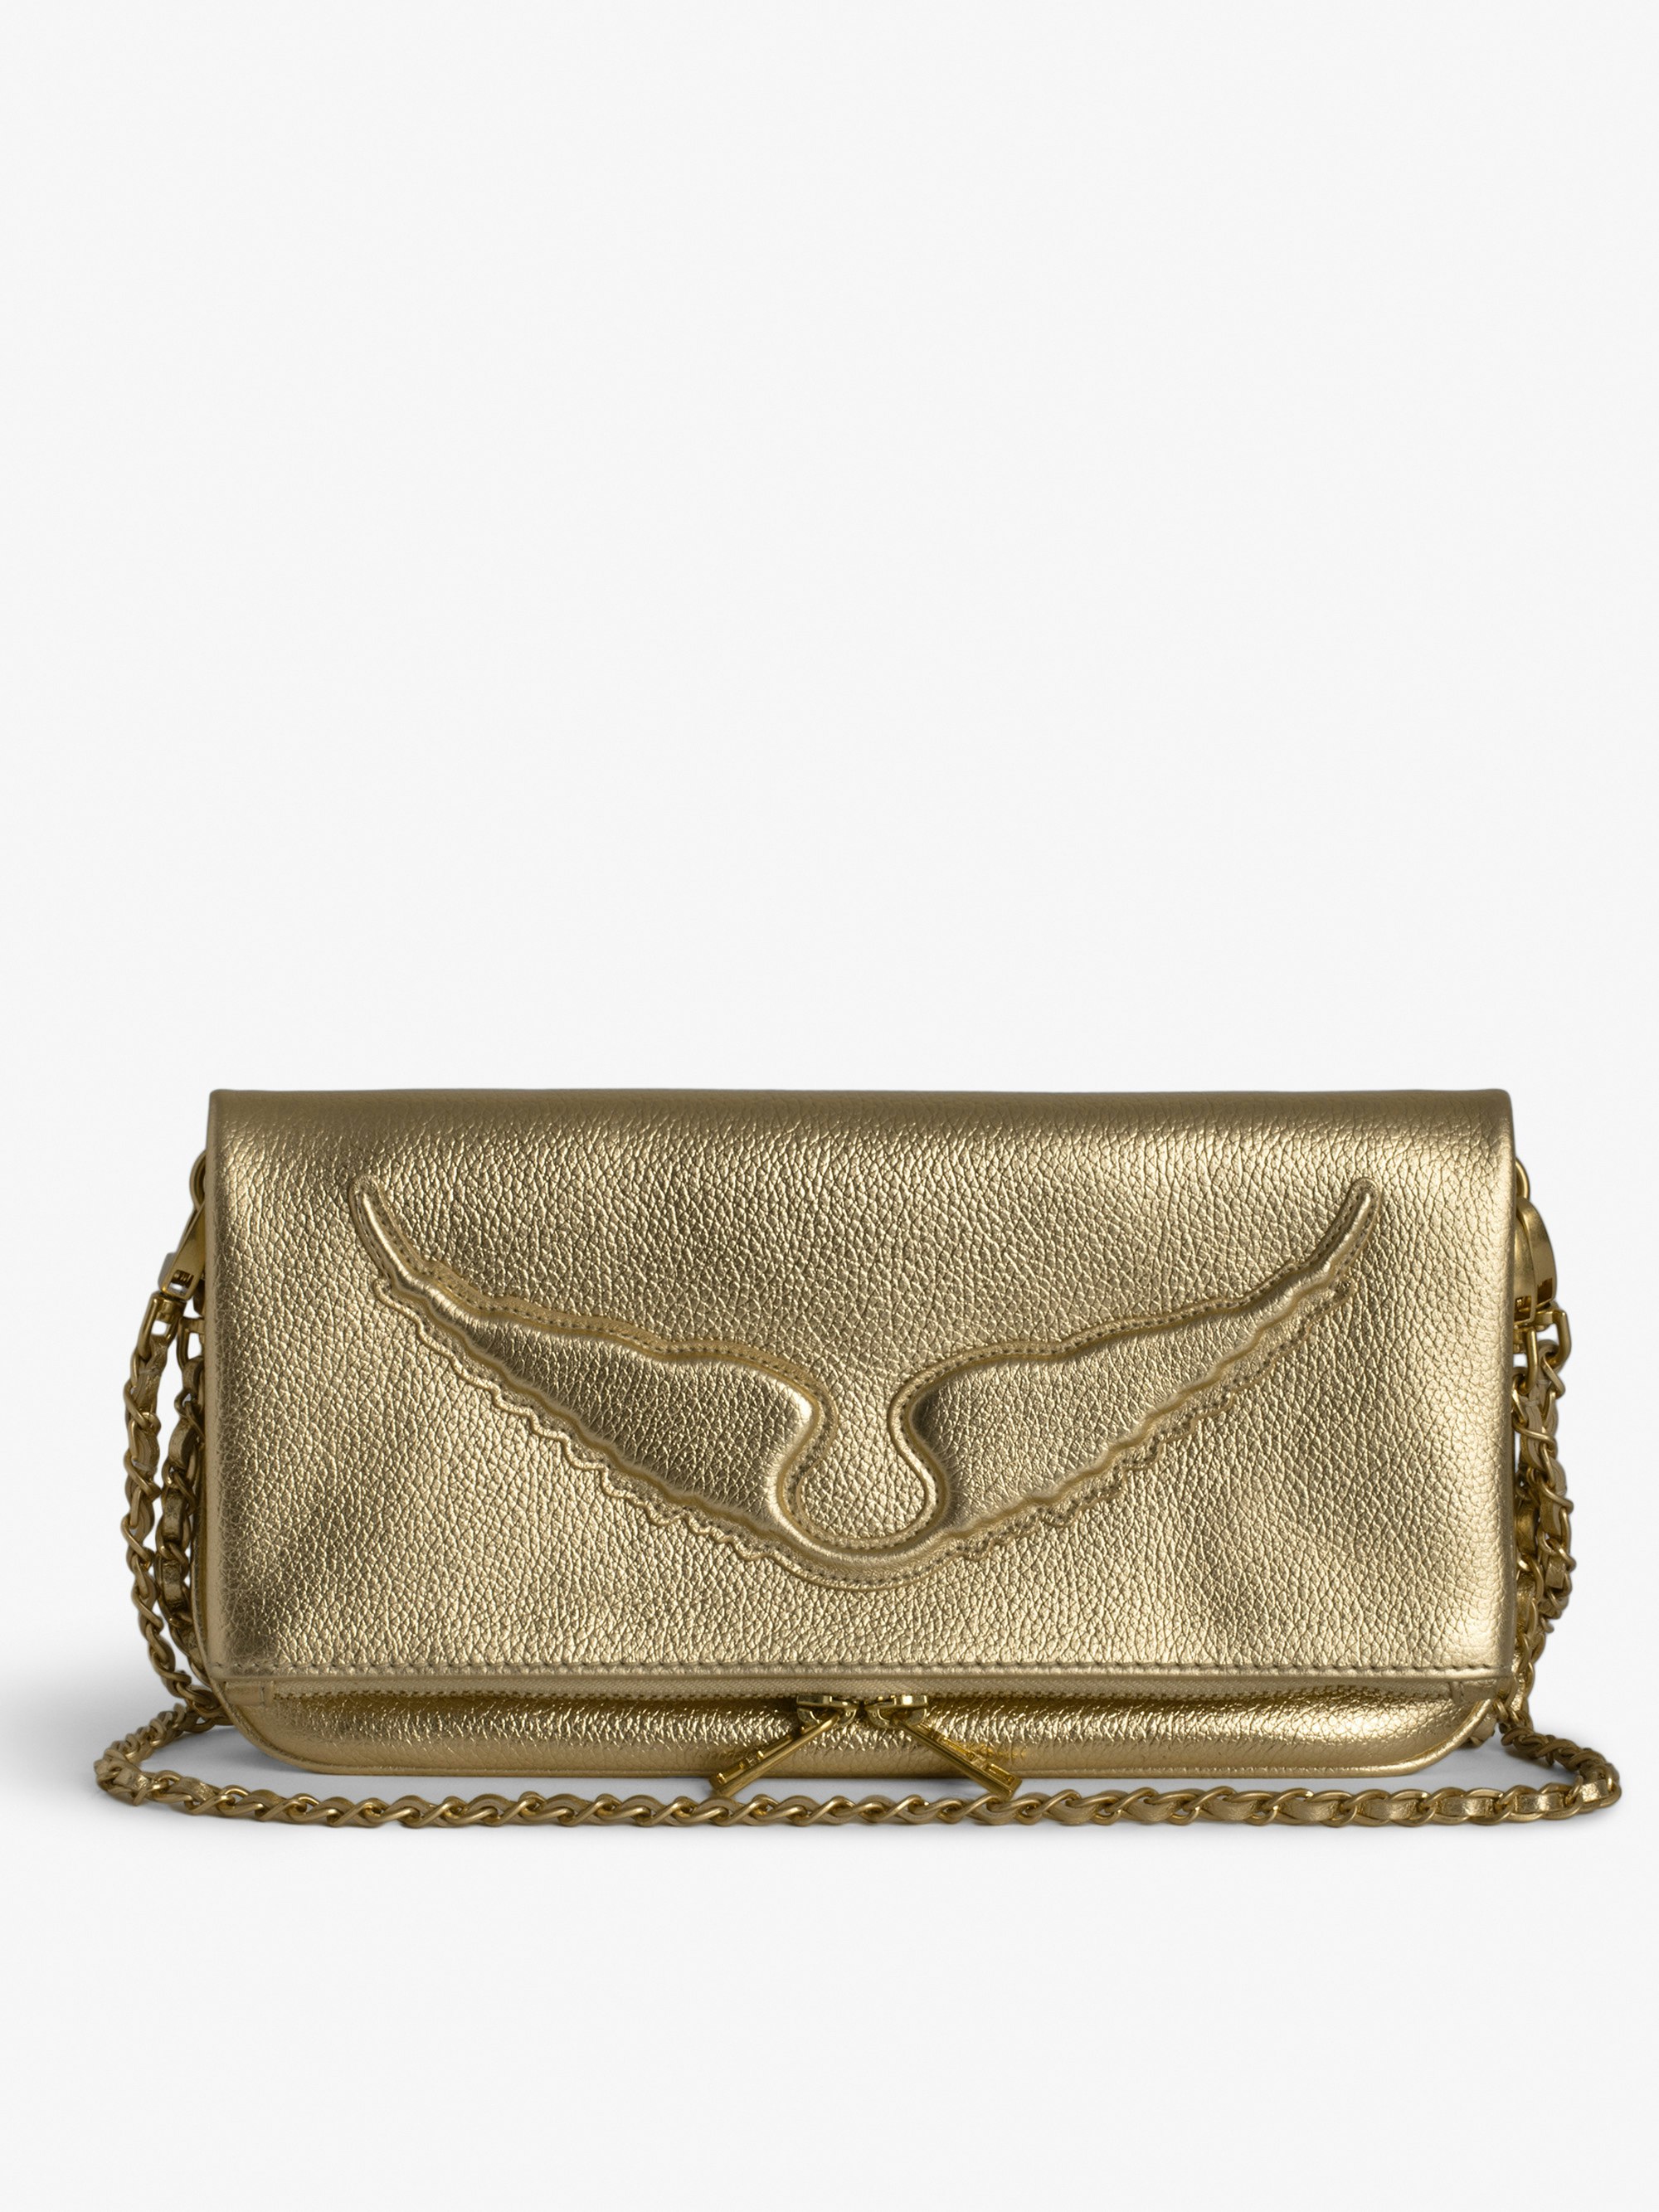 Rock Clutch - Gold metallic grained leather clutch with double chain and signature embossed wings.